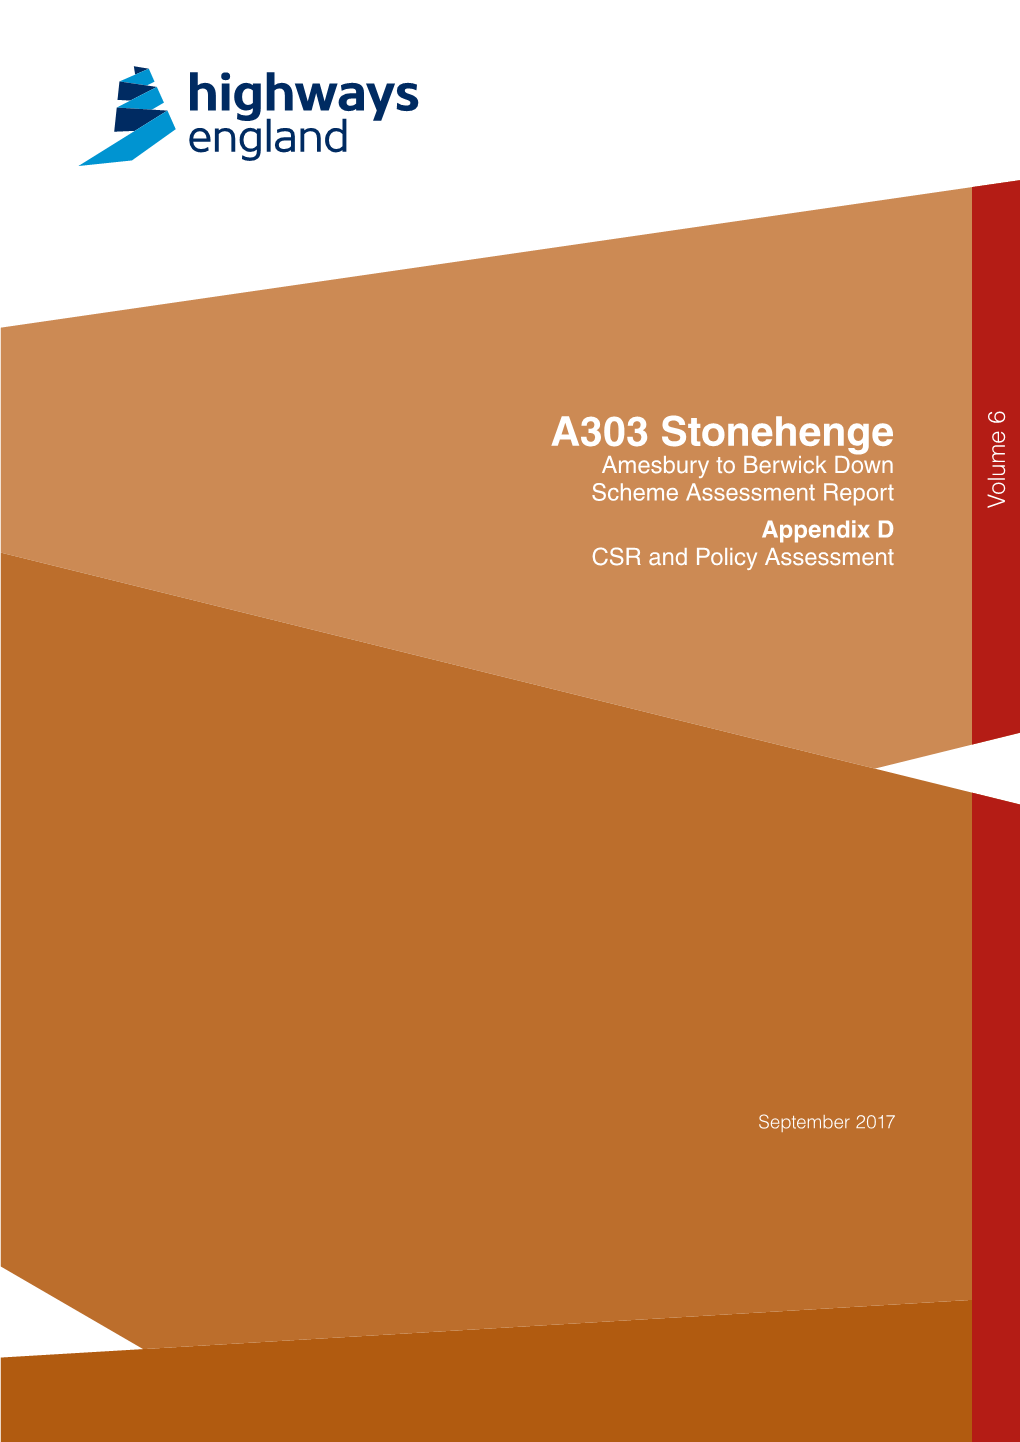 A303 Stonehenge Amesbury to Berwick Down Scheme Assessment Report Volume 6 Appendix D CSR and Policy Assessment